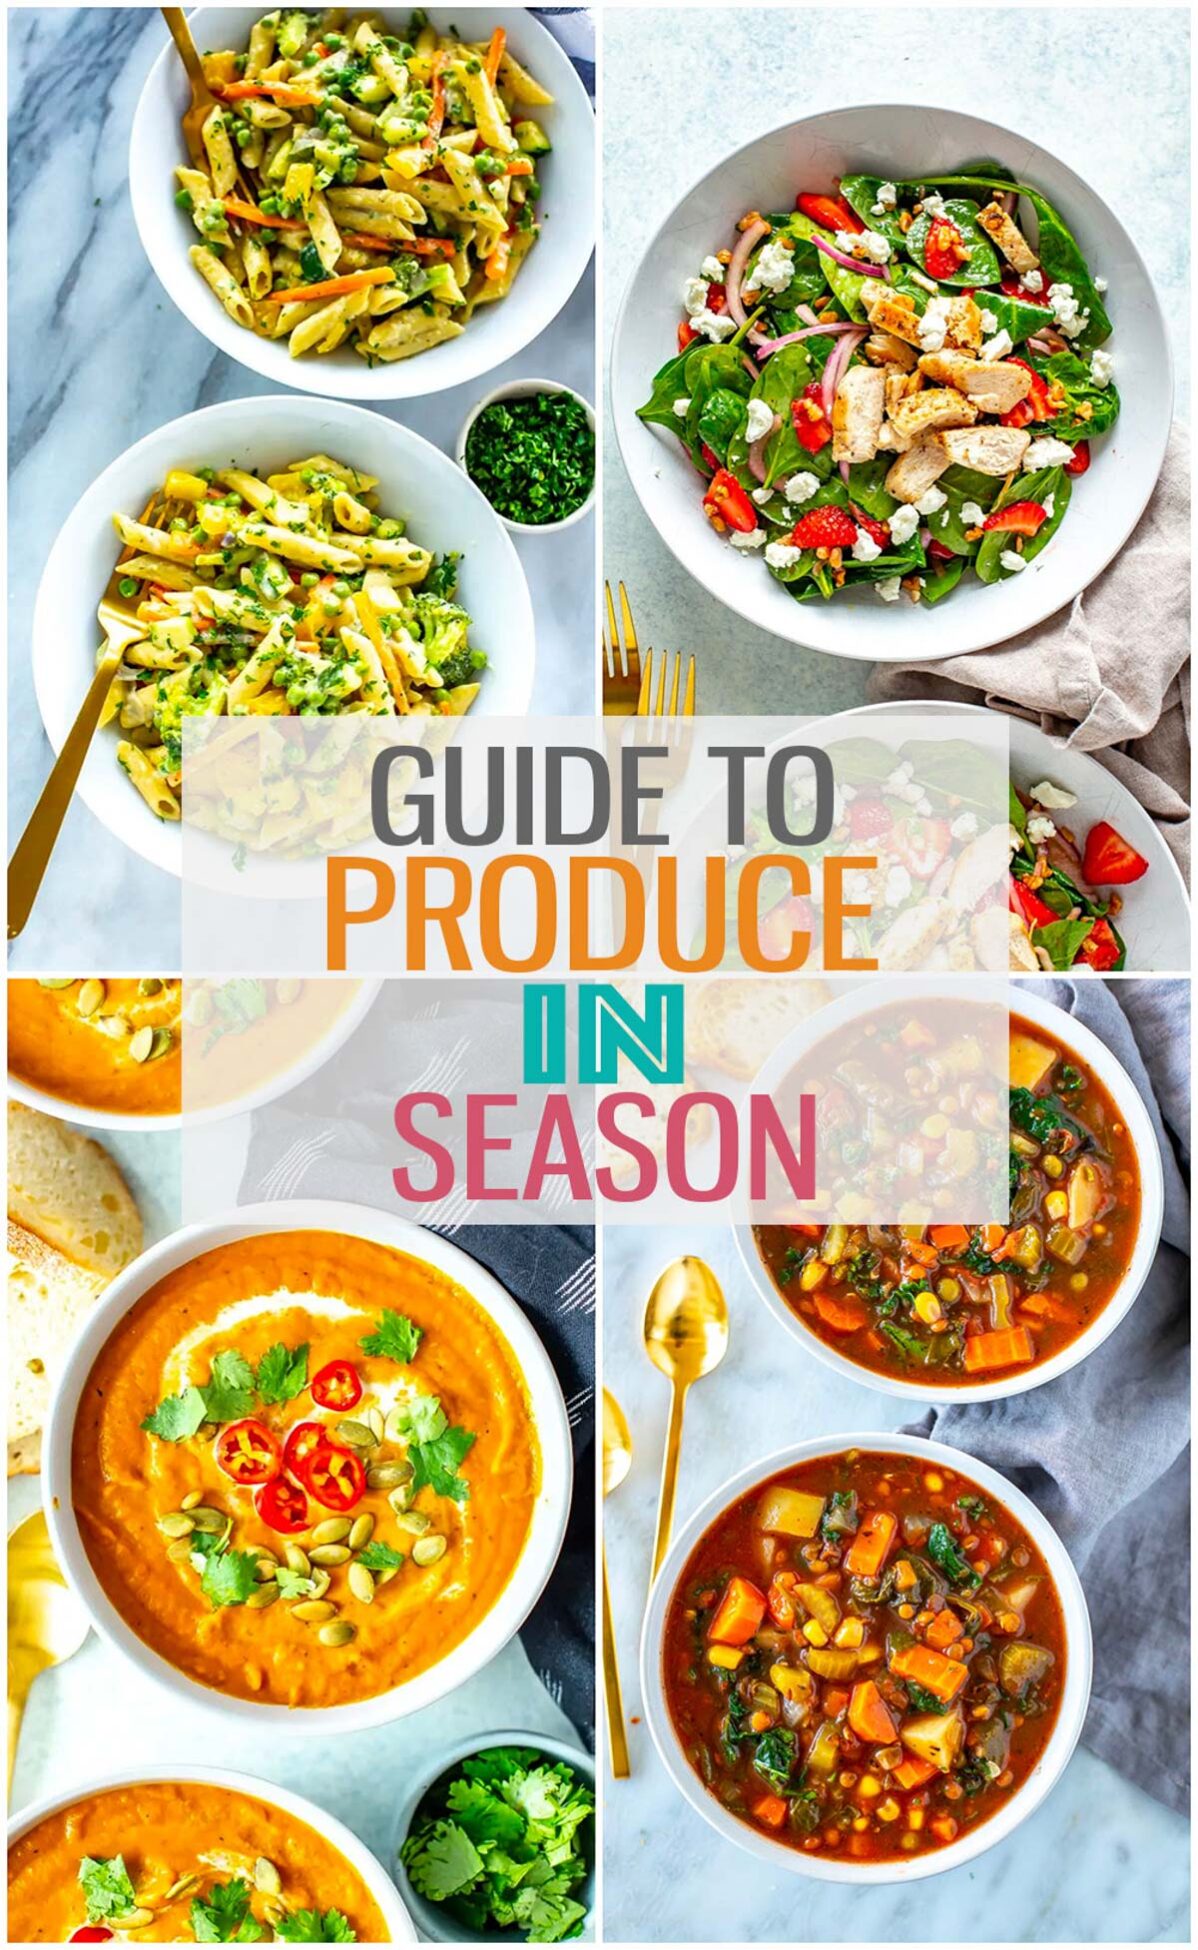 A collage of four different recipes with the text "Guide to Produce in Season" layered over top.